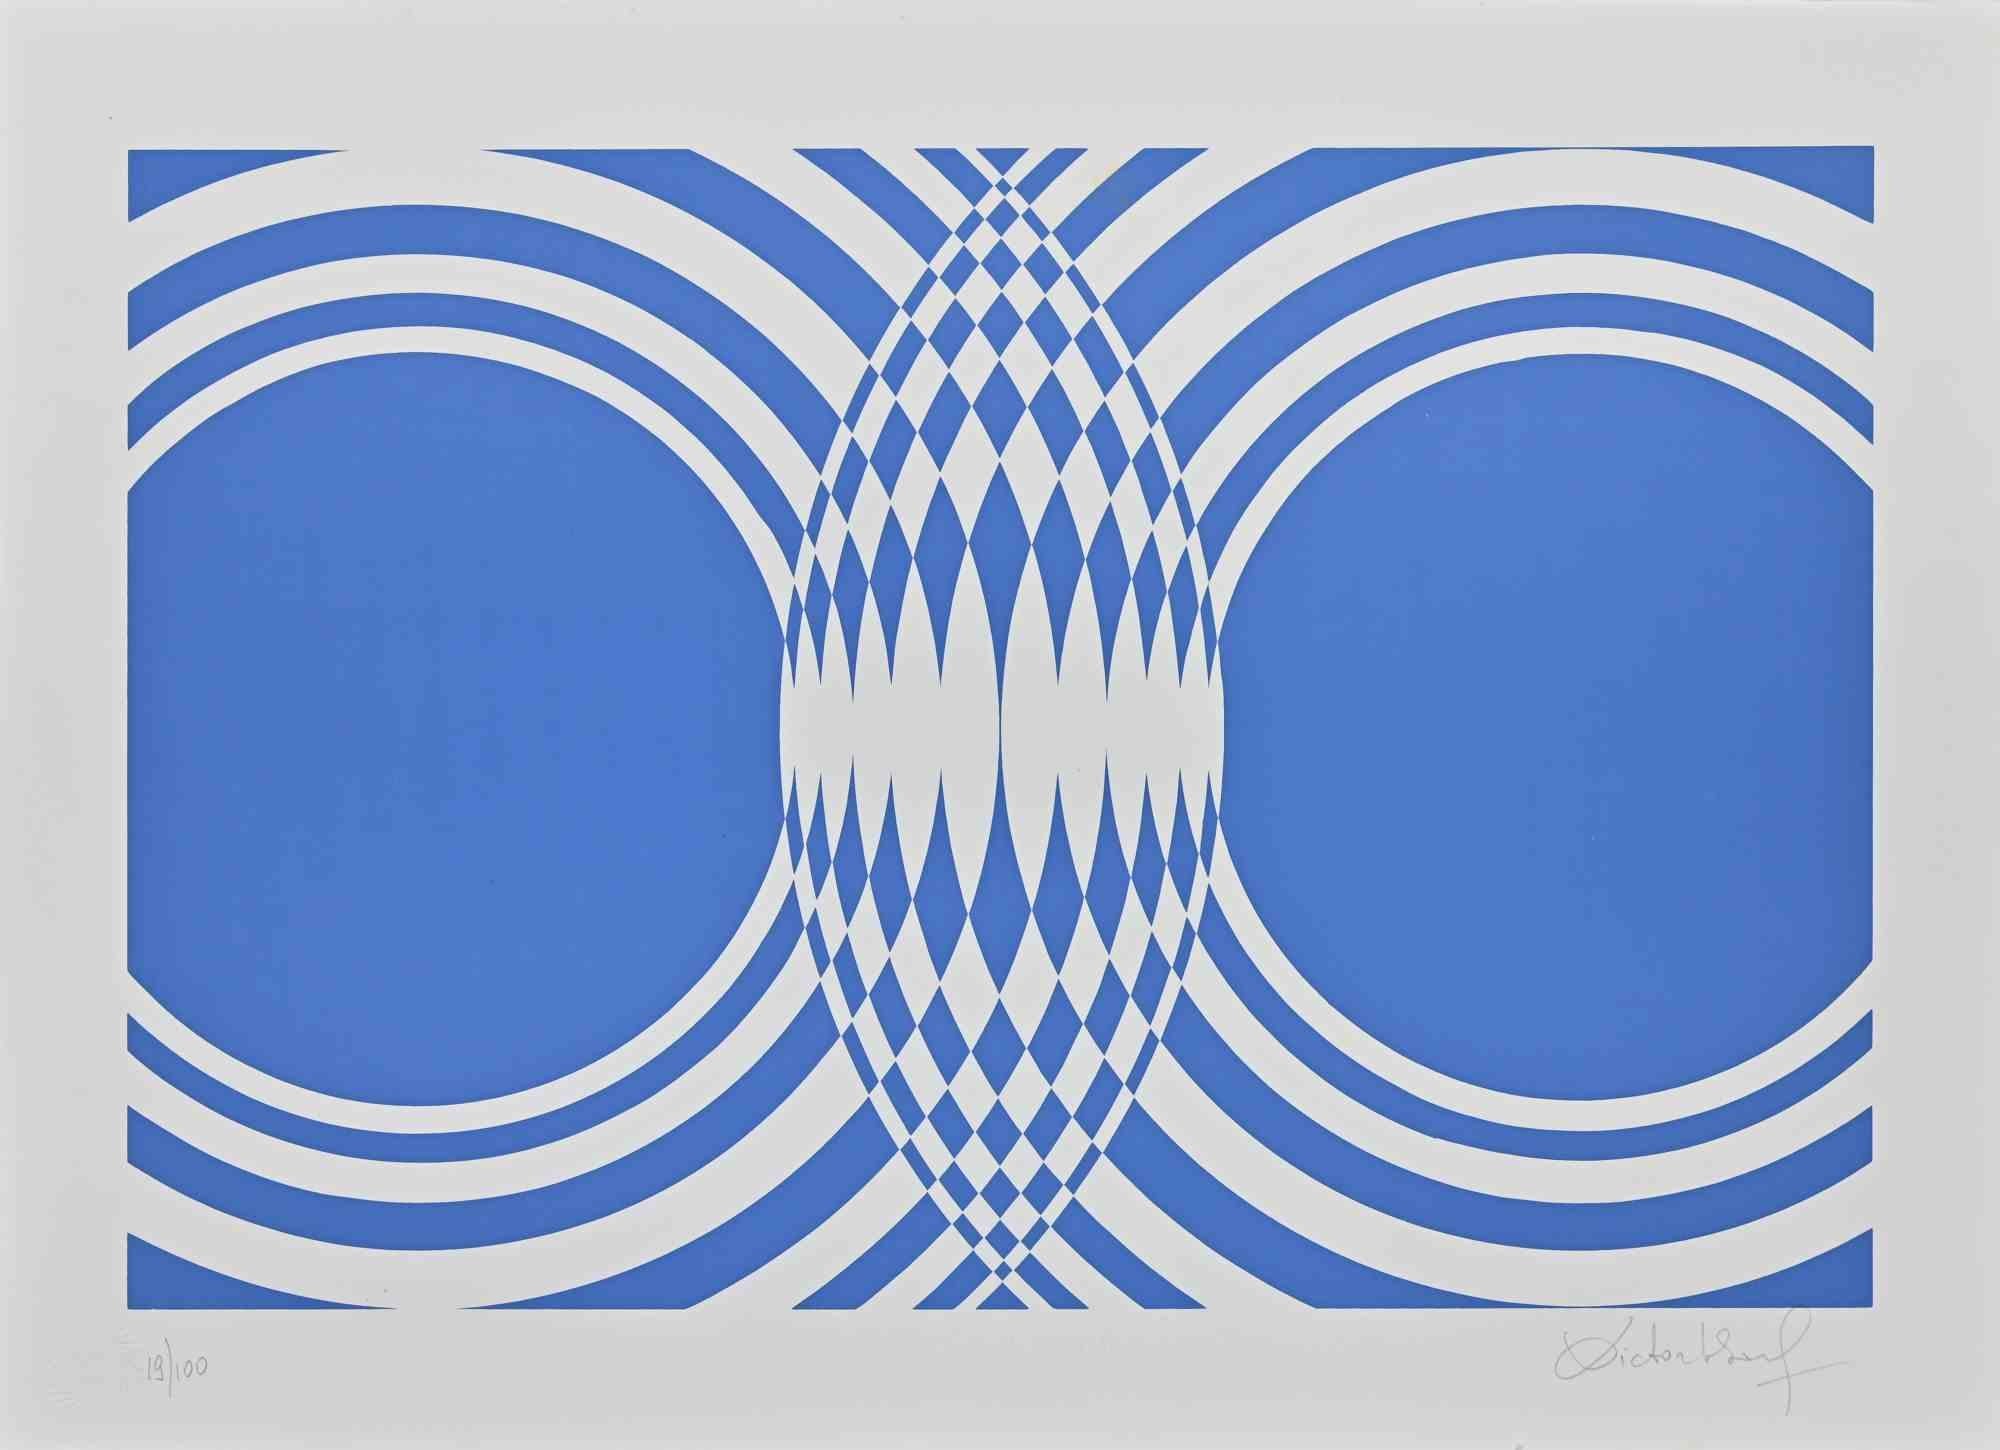 Blue Composition is an original contemporary artwork realized by Victor Debach in the 1970s.

Mixed colored screen print on paper.

Hand signed on the lower right margin.

Numbered on the lower left.

Edition of 19/100